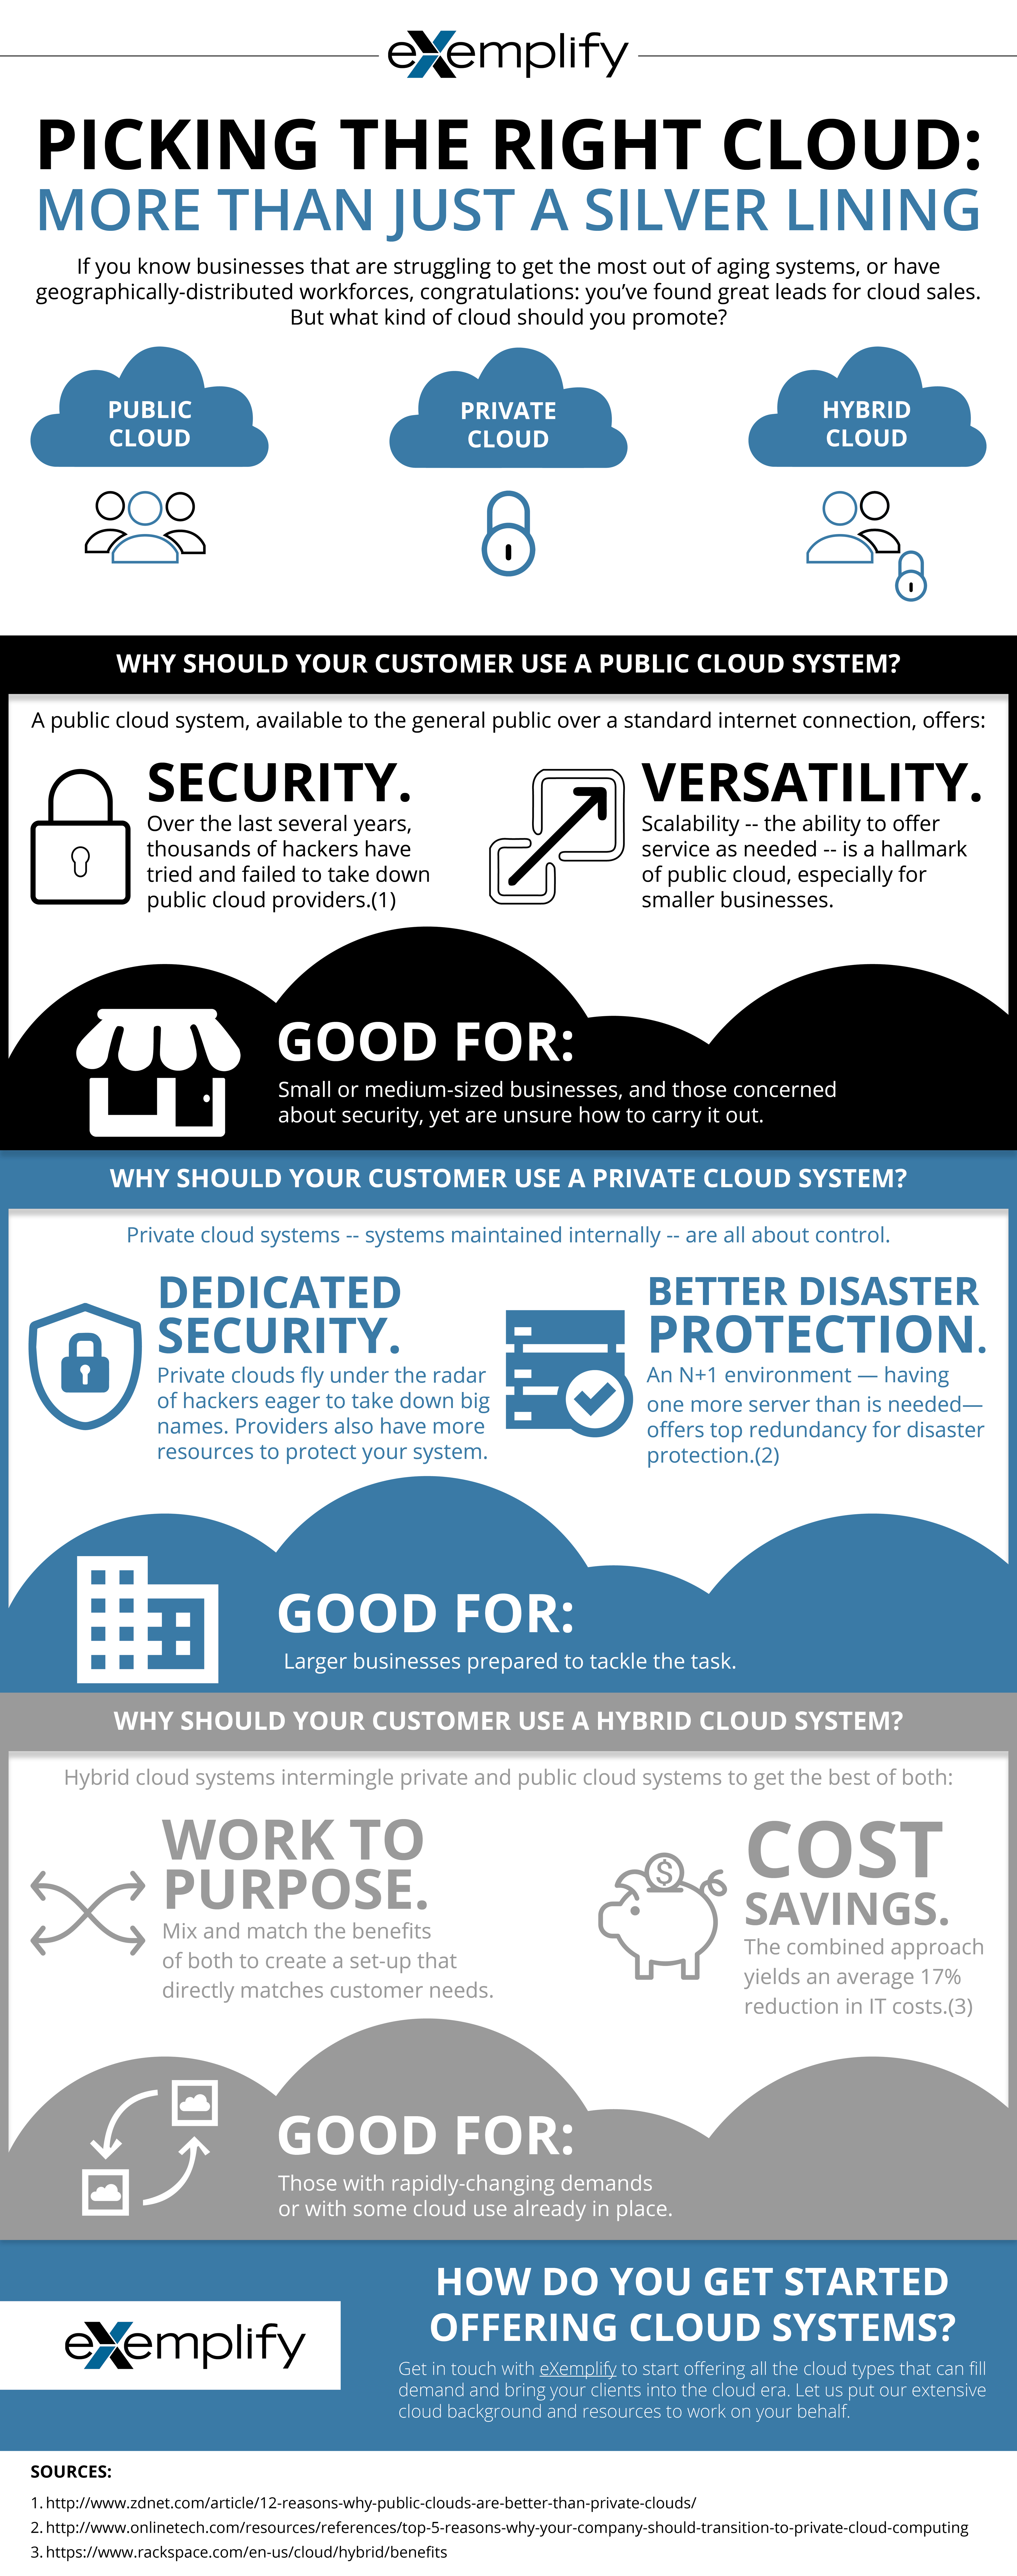 Picking the Right Cloud System: More Than Just a Silver Lining